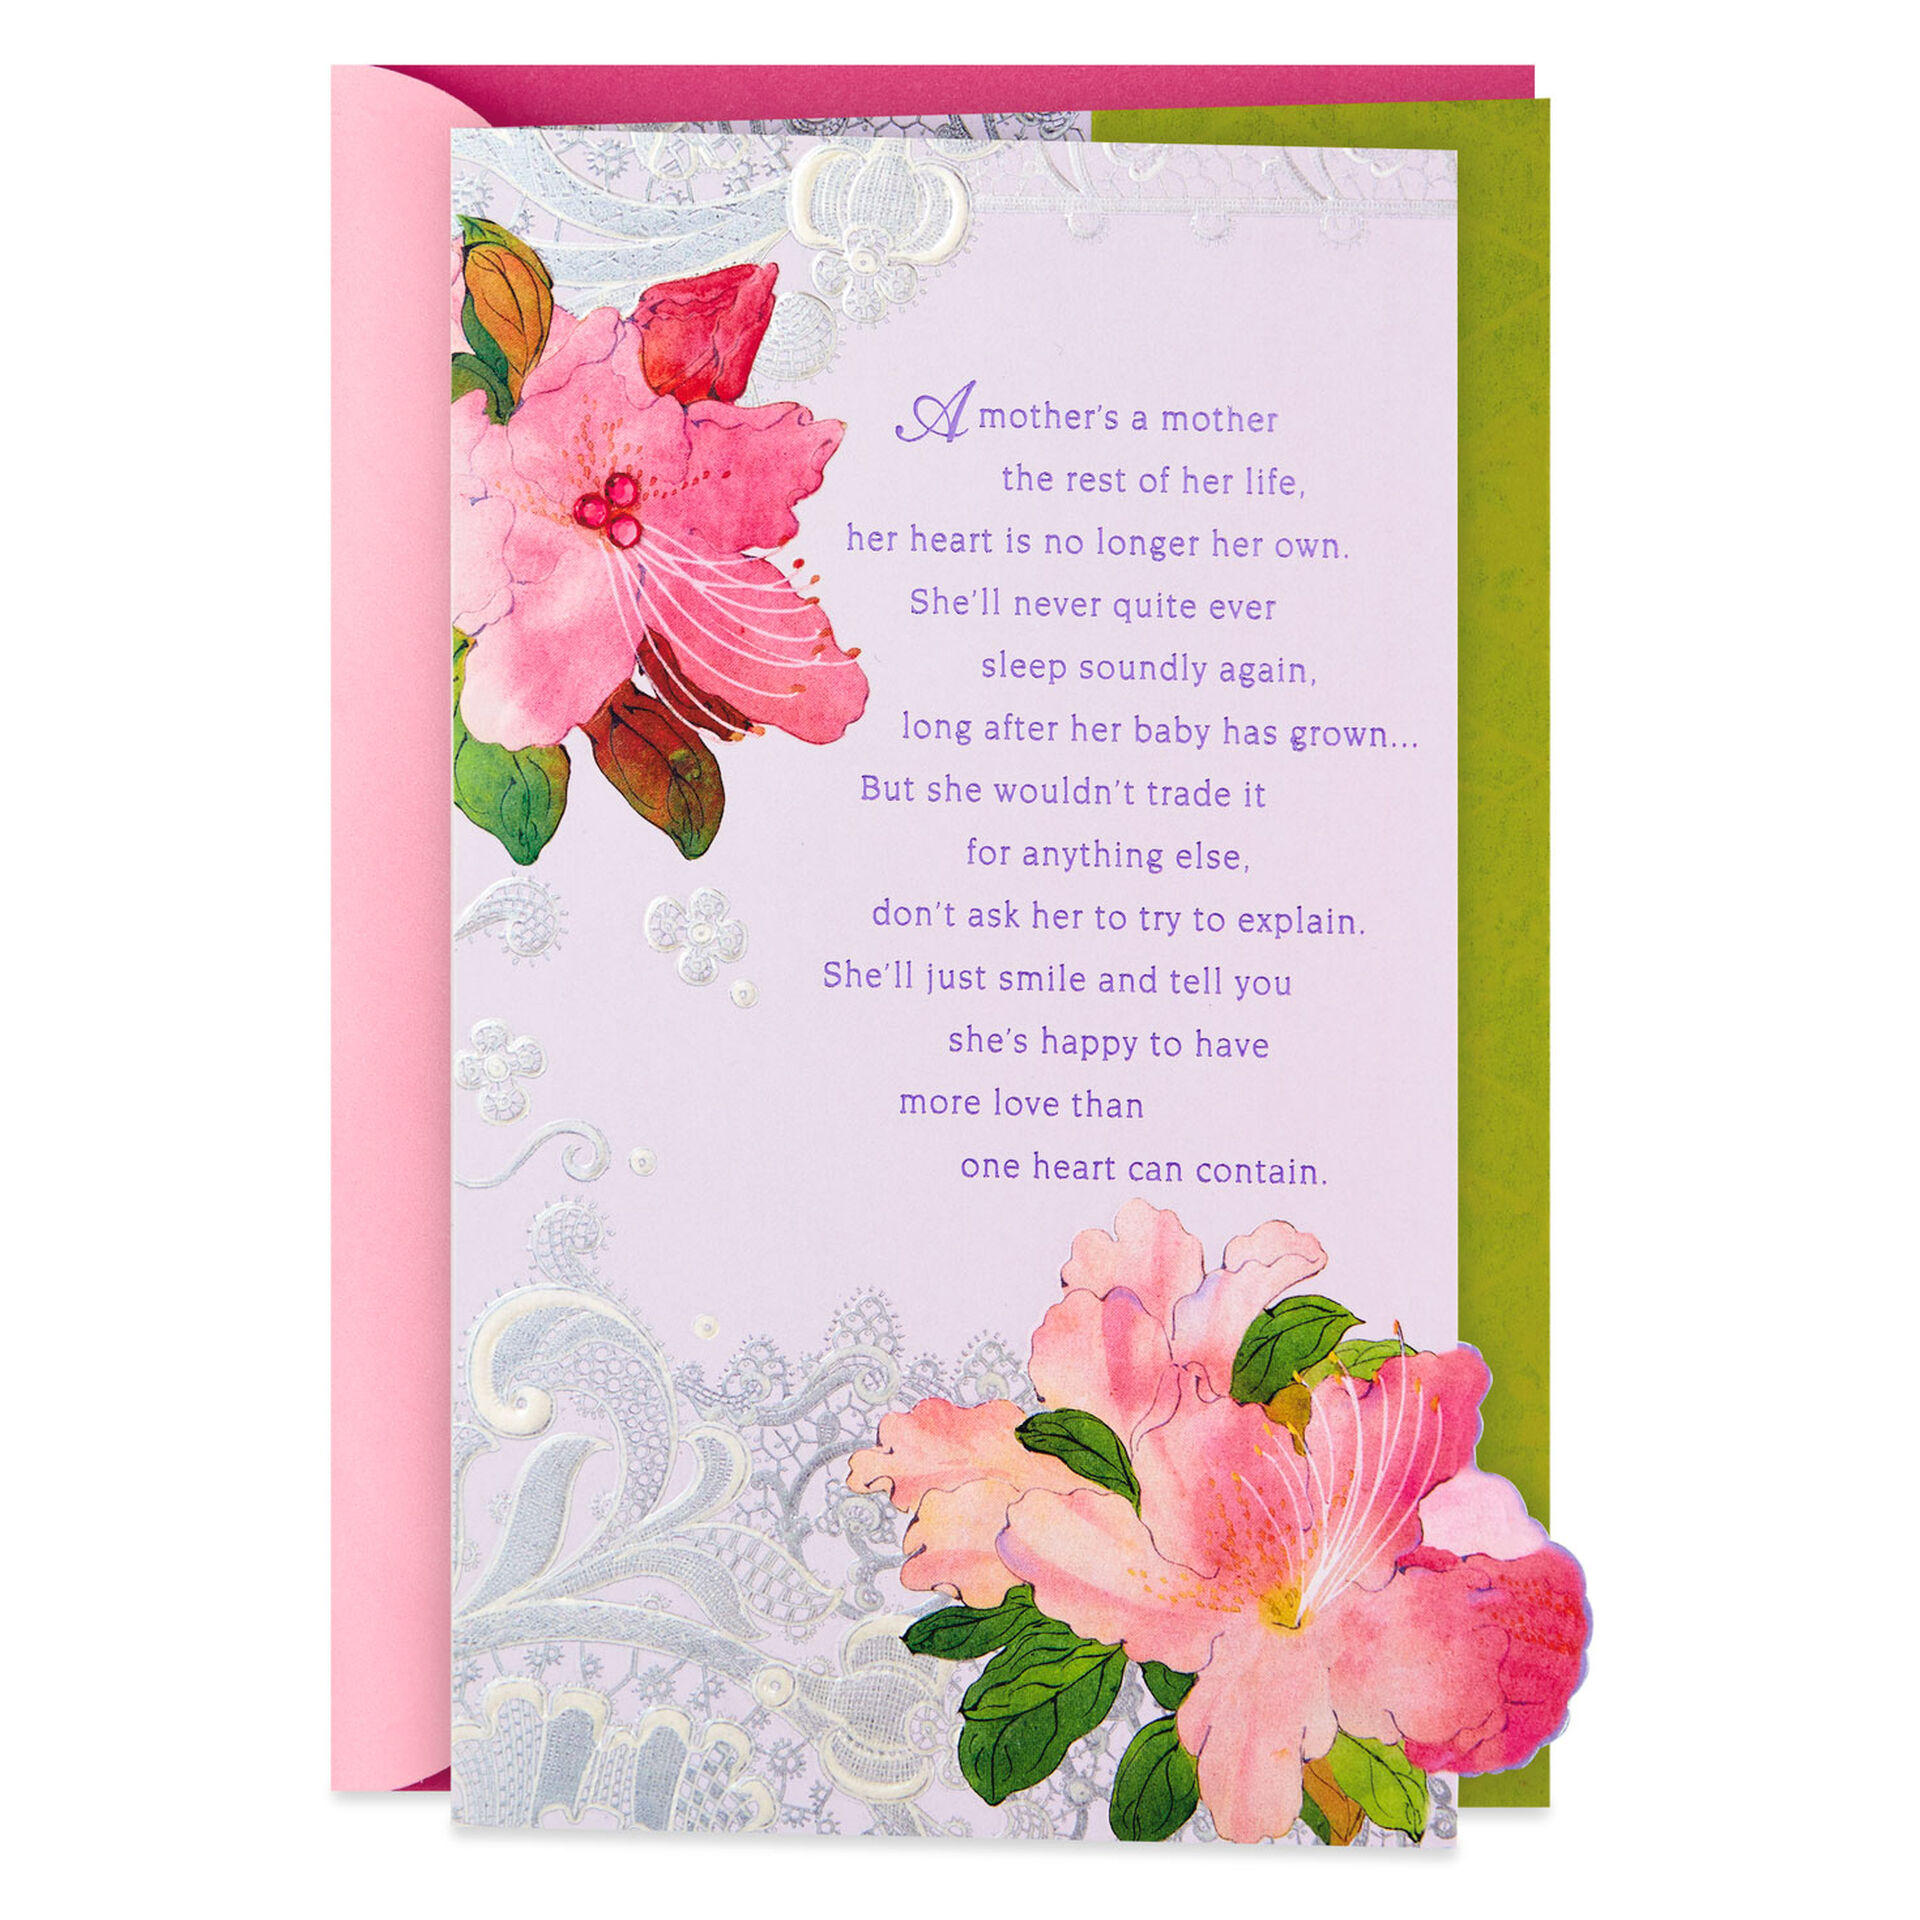 a-mother-s-life-poem-mother-s-day-card-greeting-cards-hallmark